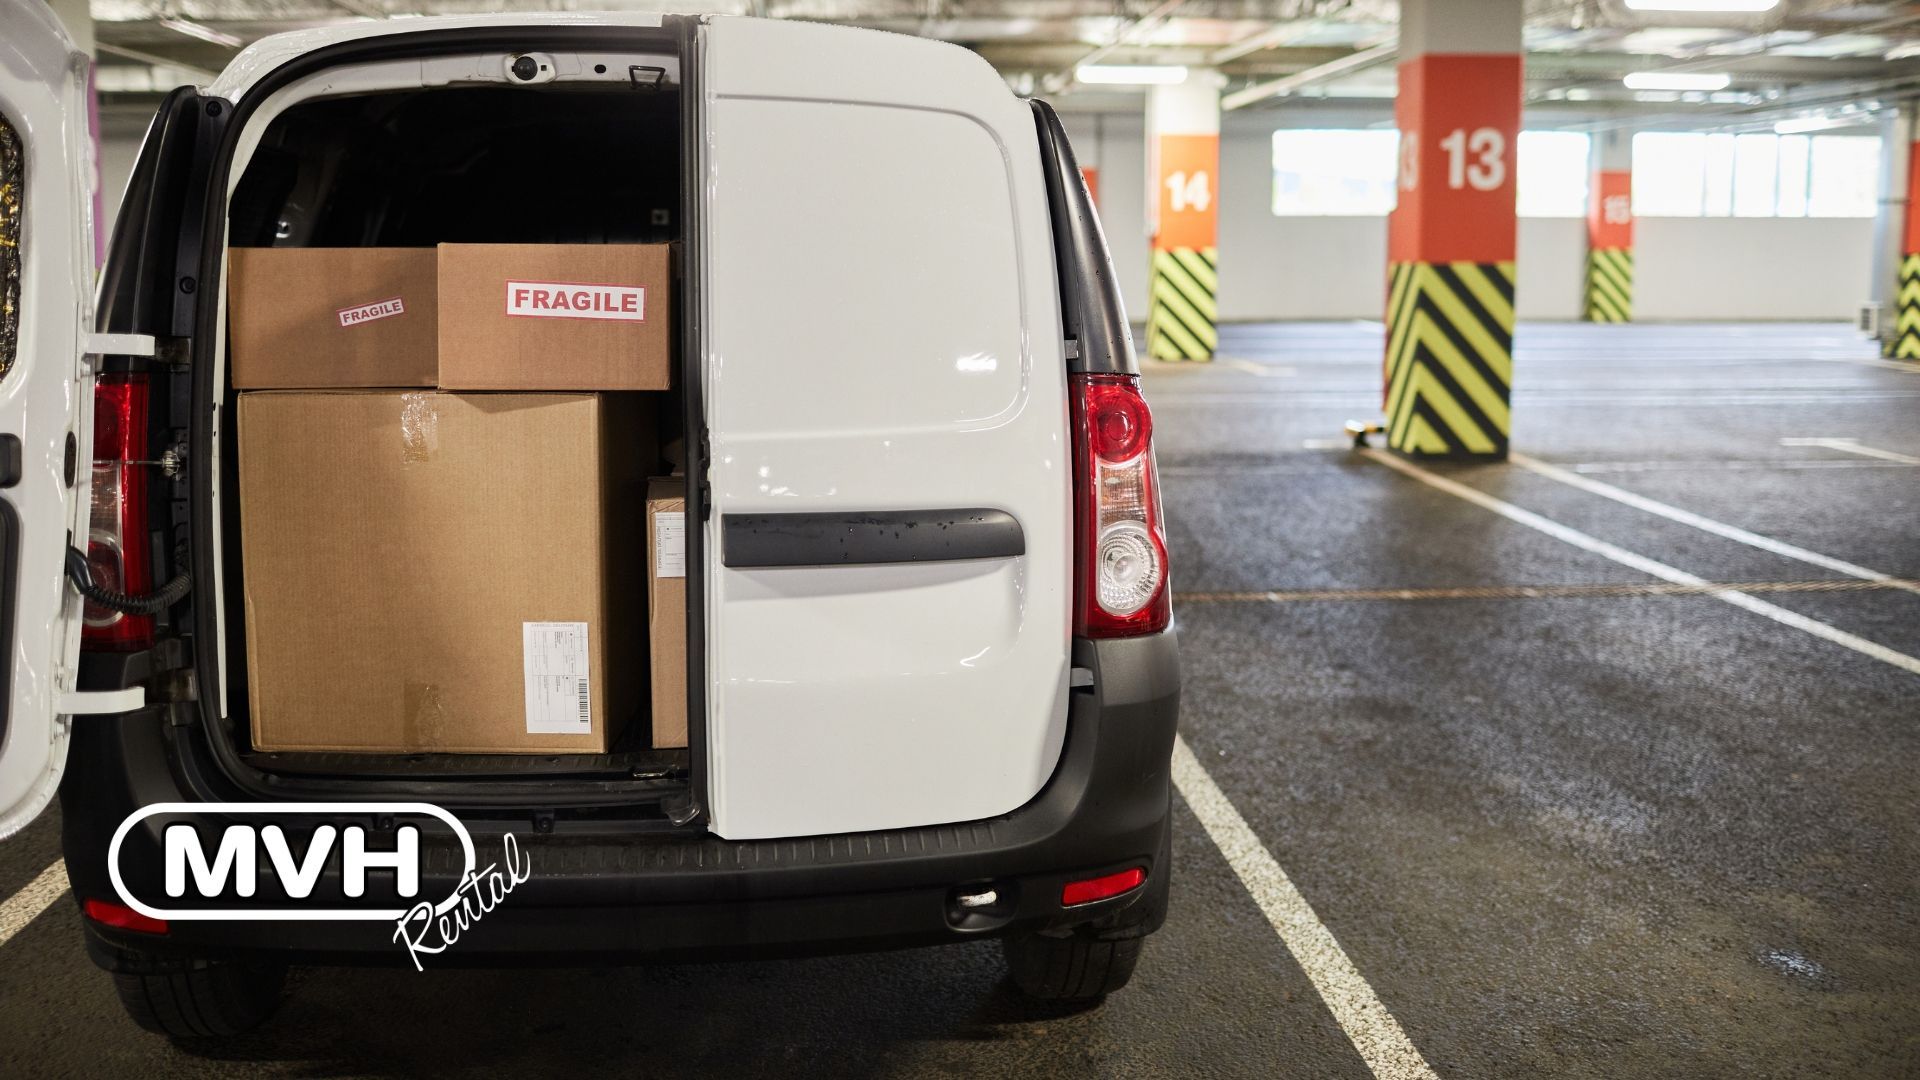 In 2017, it was estimated that a van was broken into every 23 minutes. How can you avoid this fate when hiring a van? Read on for some useful tips.